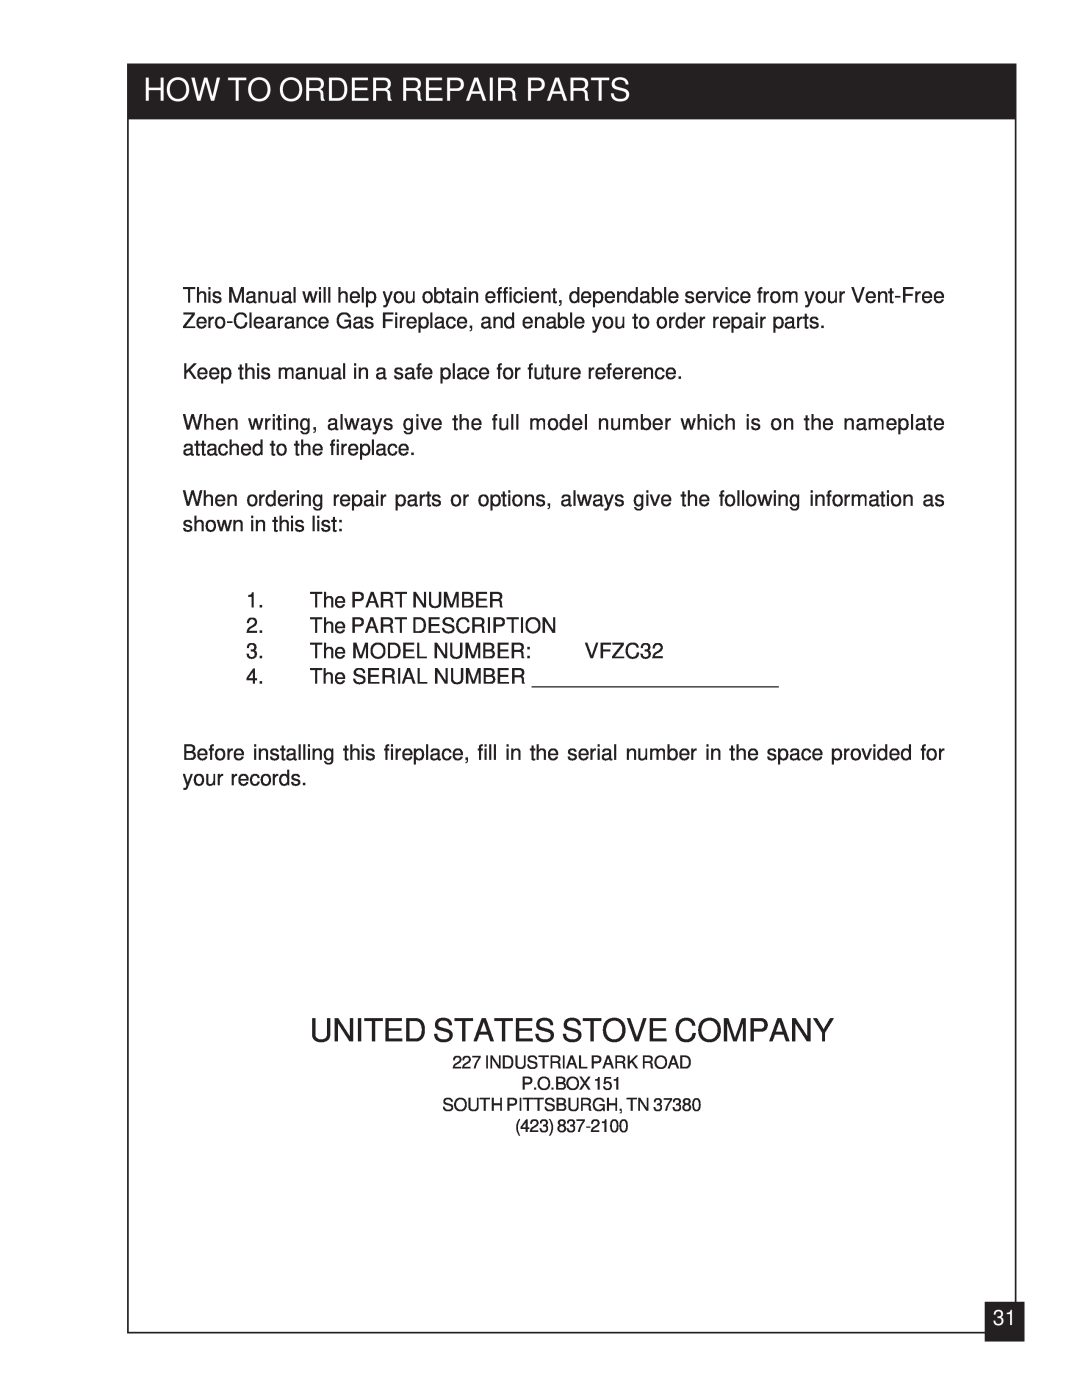 United States Stove VFZC32L, VFZC32N installation manual How To Order Repair Parts, United States Stove Company 